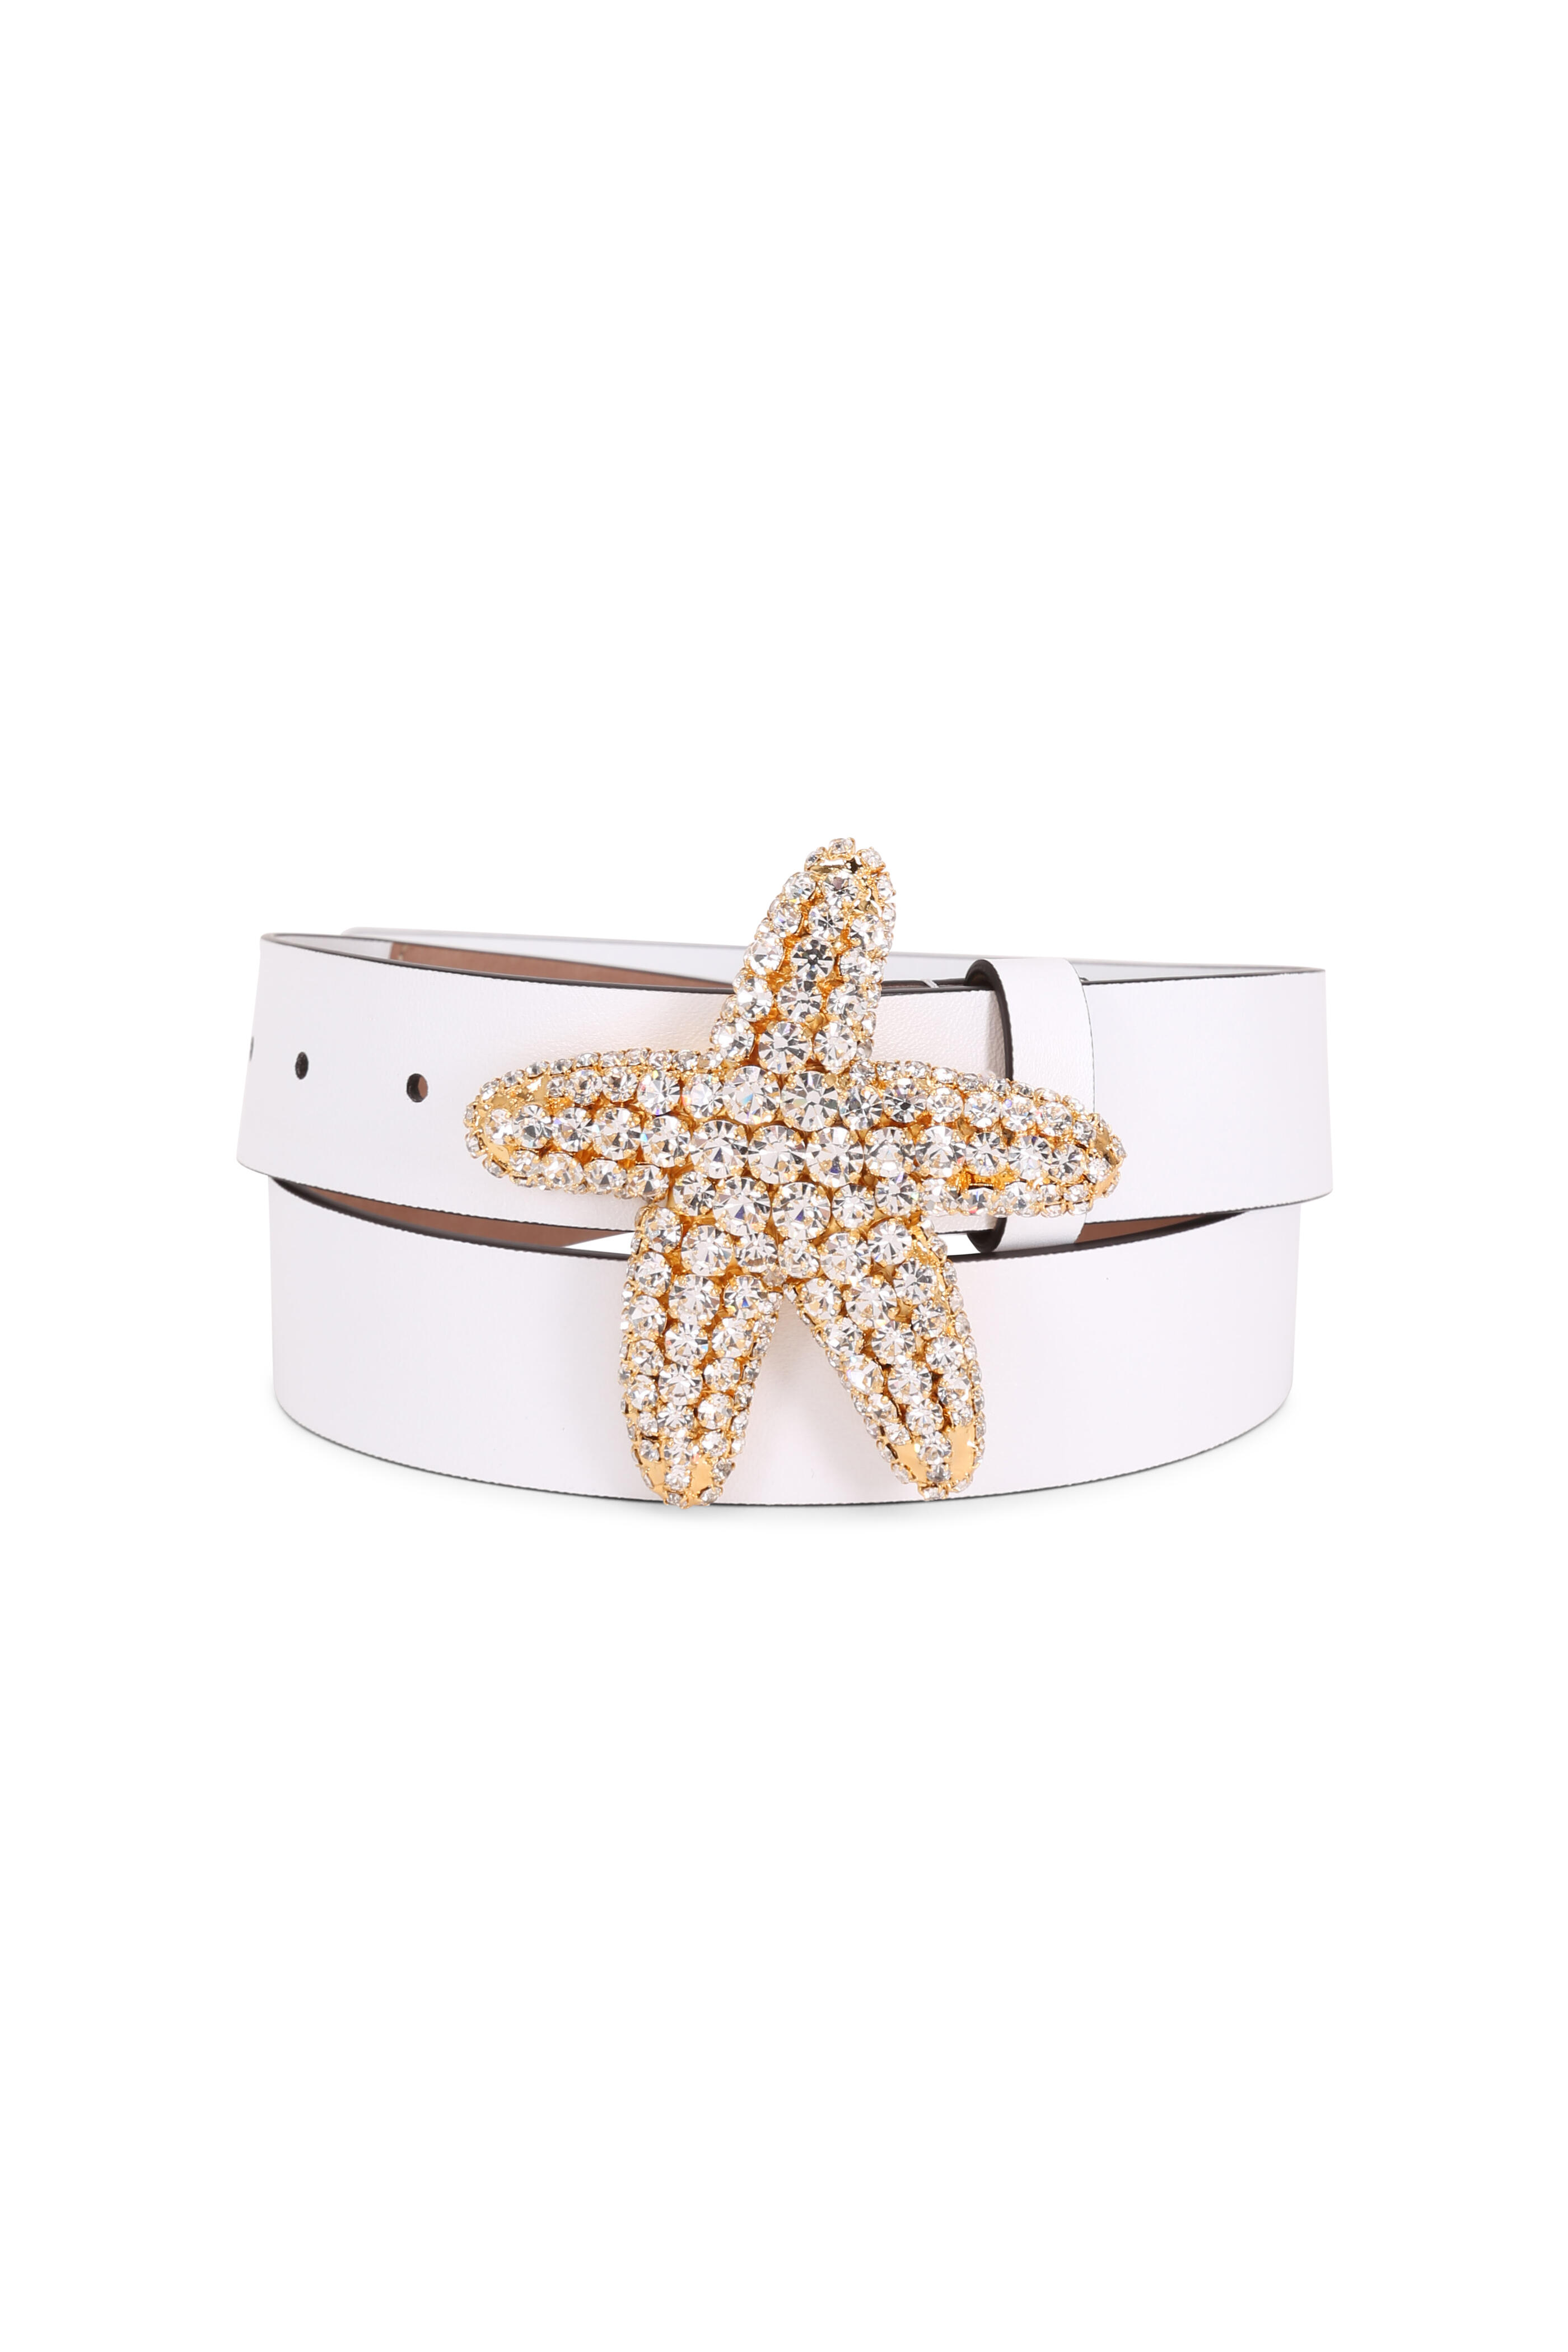 Michael Kors Collection - Optic White Leather Starfish Crystal Belt